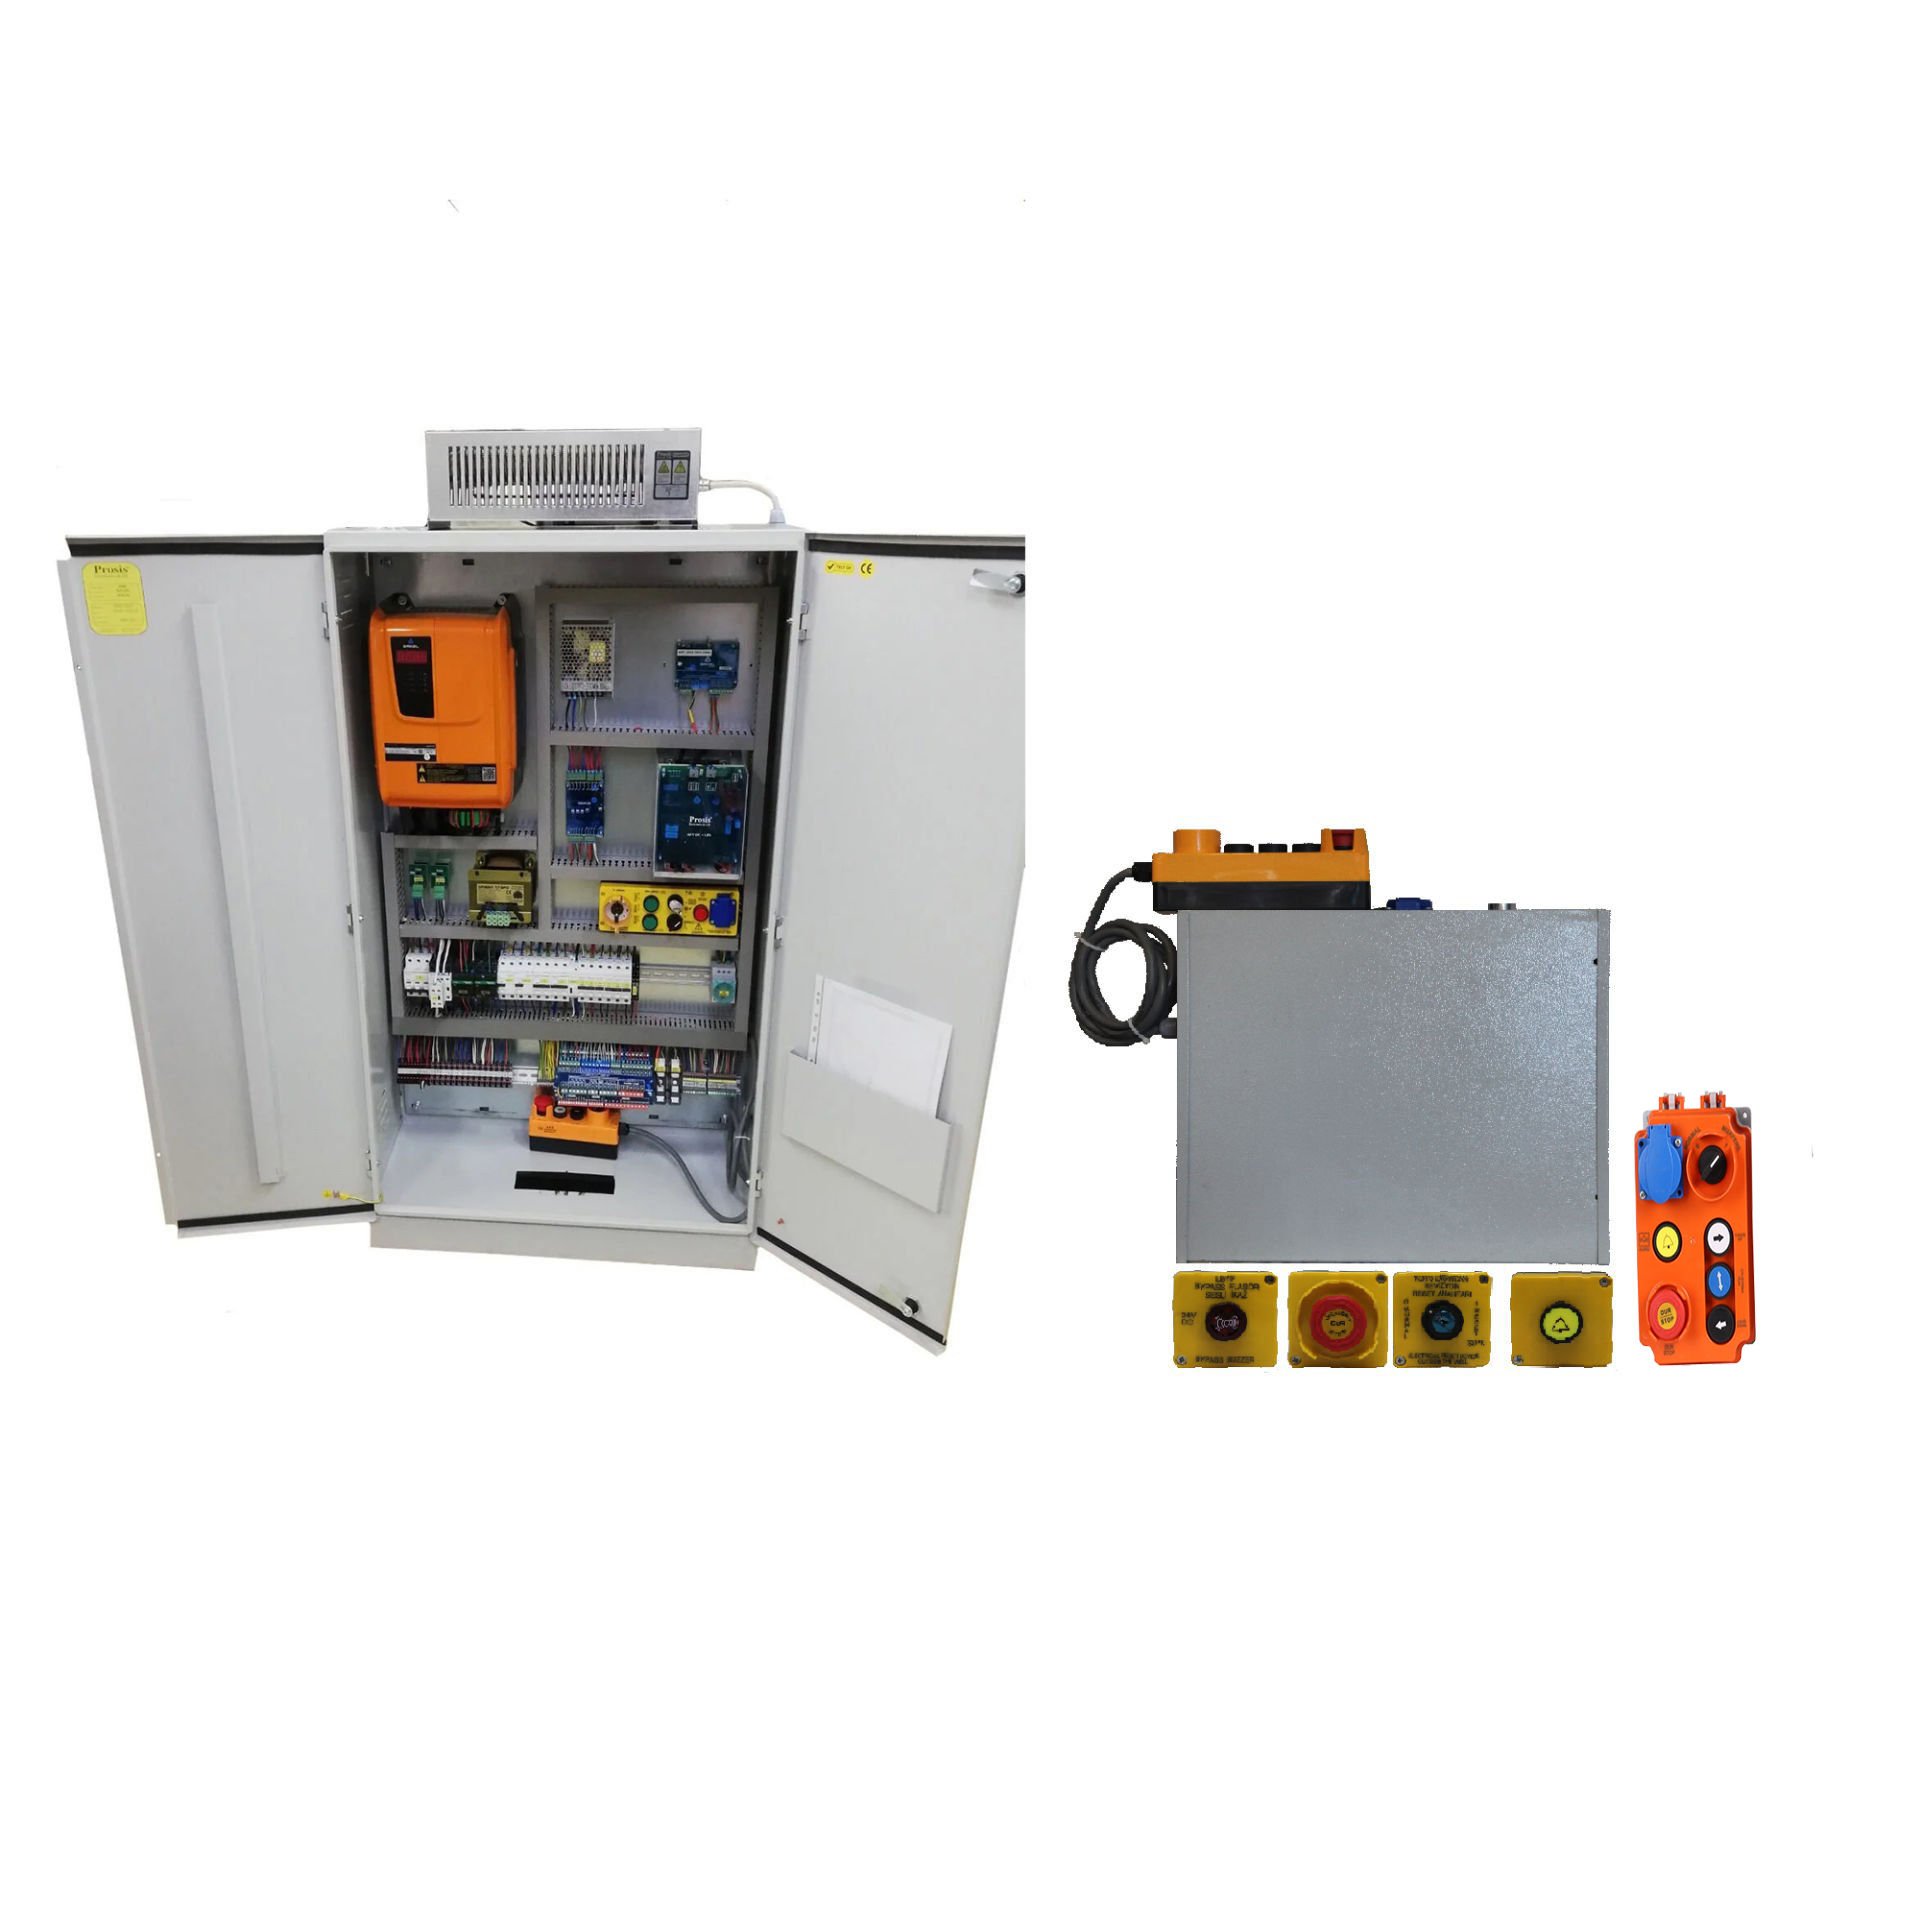 15 kW ARCODE INTEGRATED - GEARLESS-SYNCHRONOUS-MR-EN8120-BATTERY RESCUE CONTROL PANEL